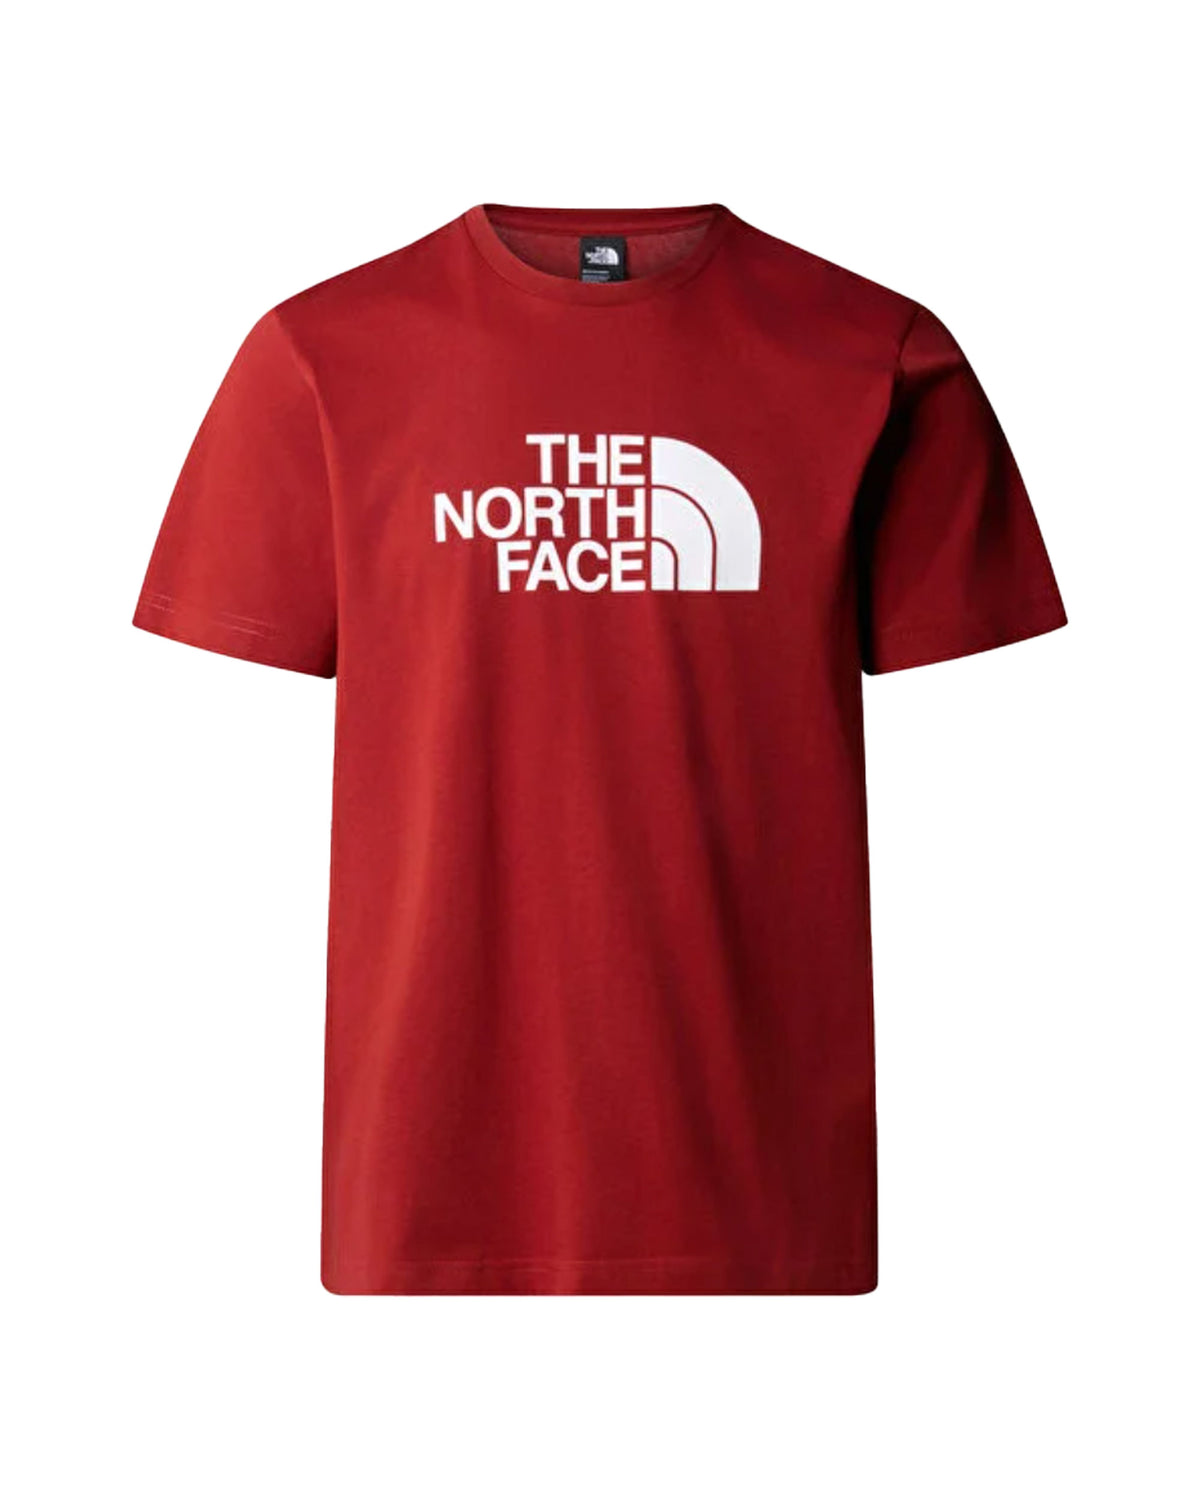 Man Tee The North Face Easy Iron Red